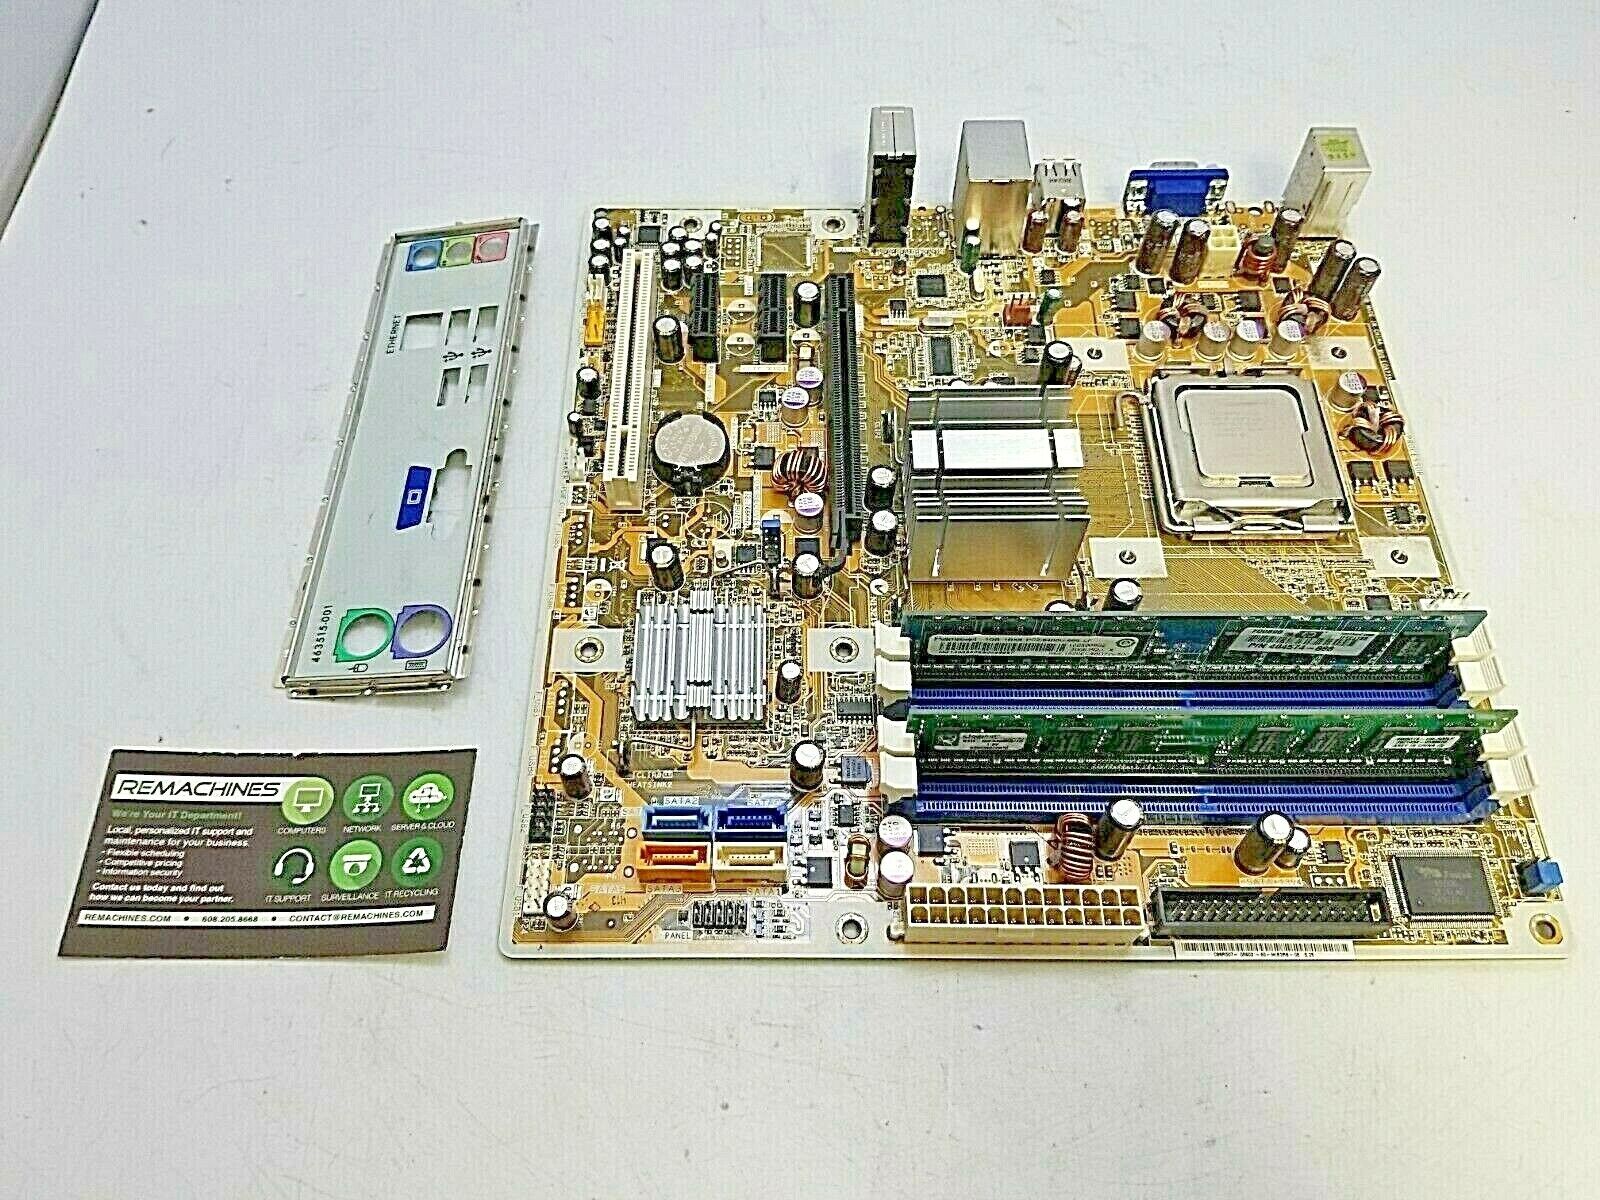 HP Compaq dx2400 Motherboard With Intel CORE 2 DUO 2.53GHz CPU 2GB RAM - TESTED